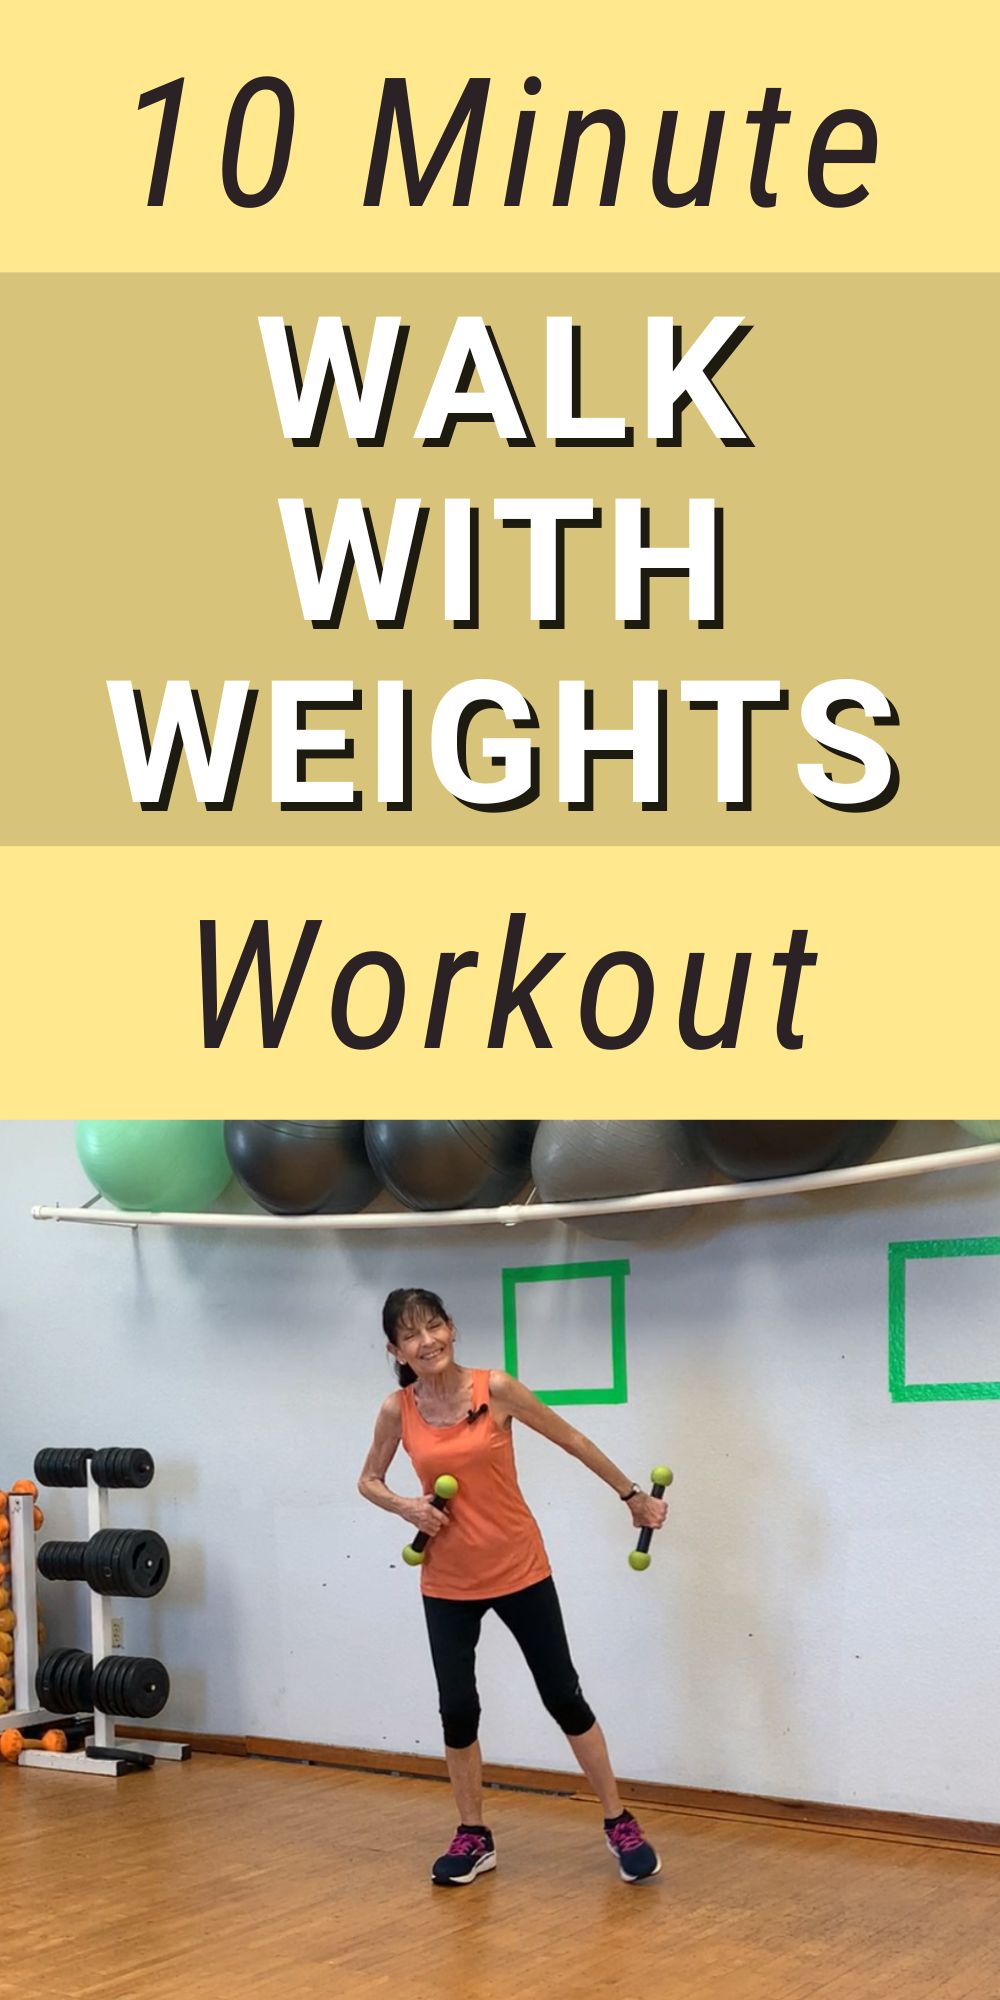 walking with weightws workout